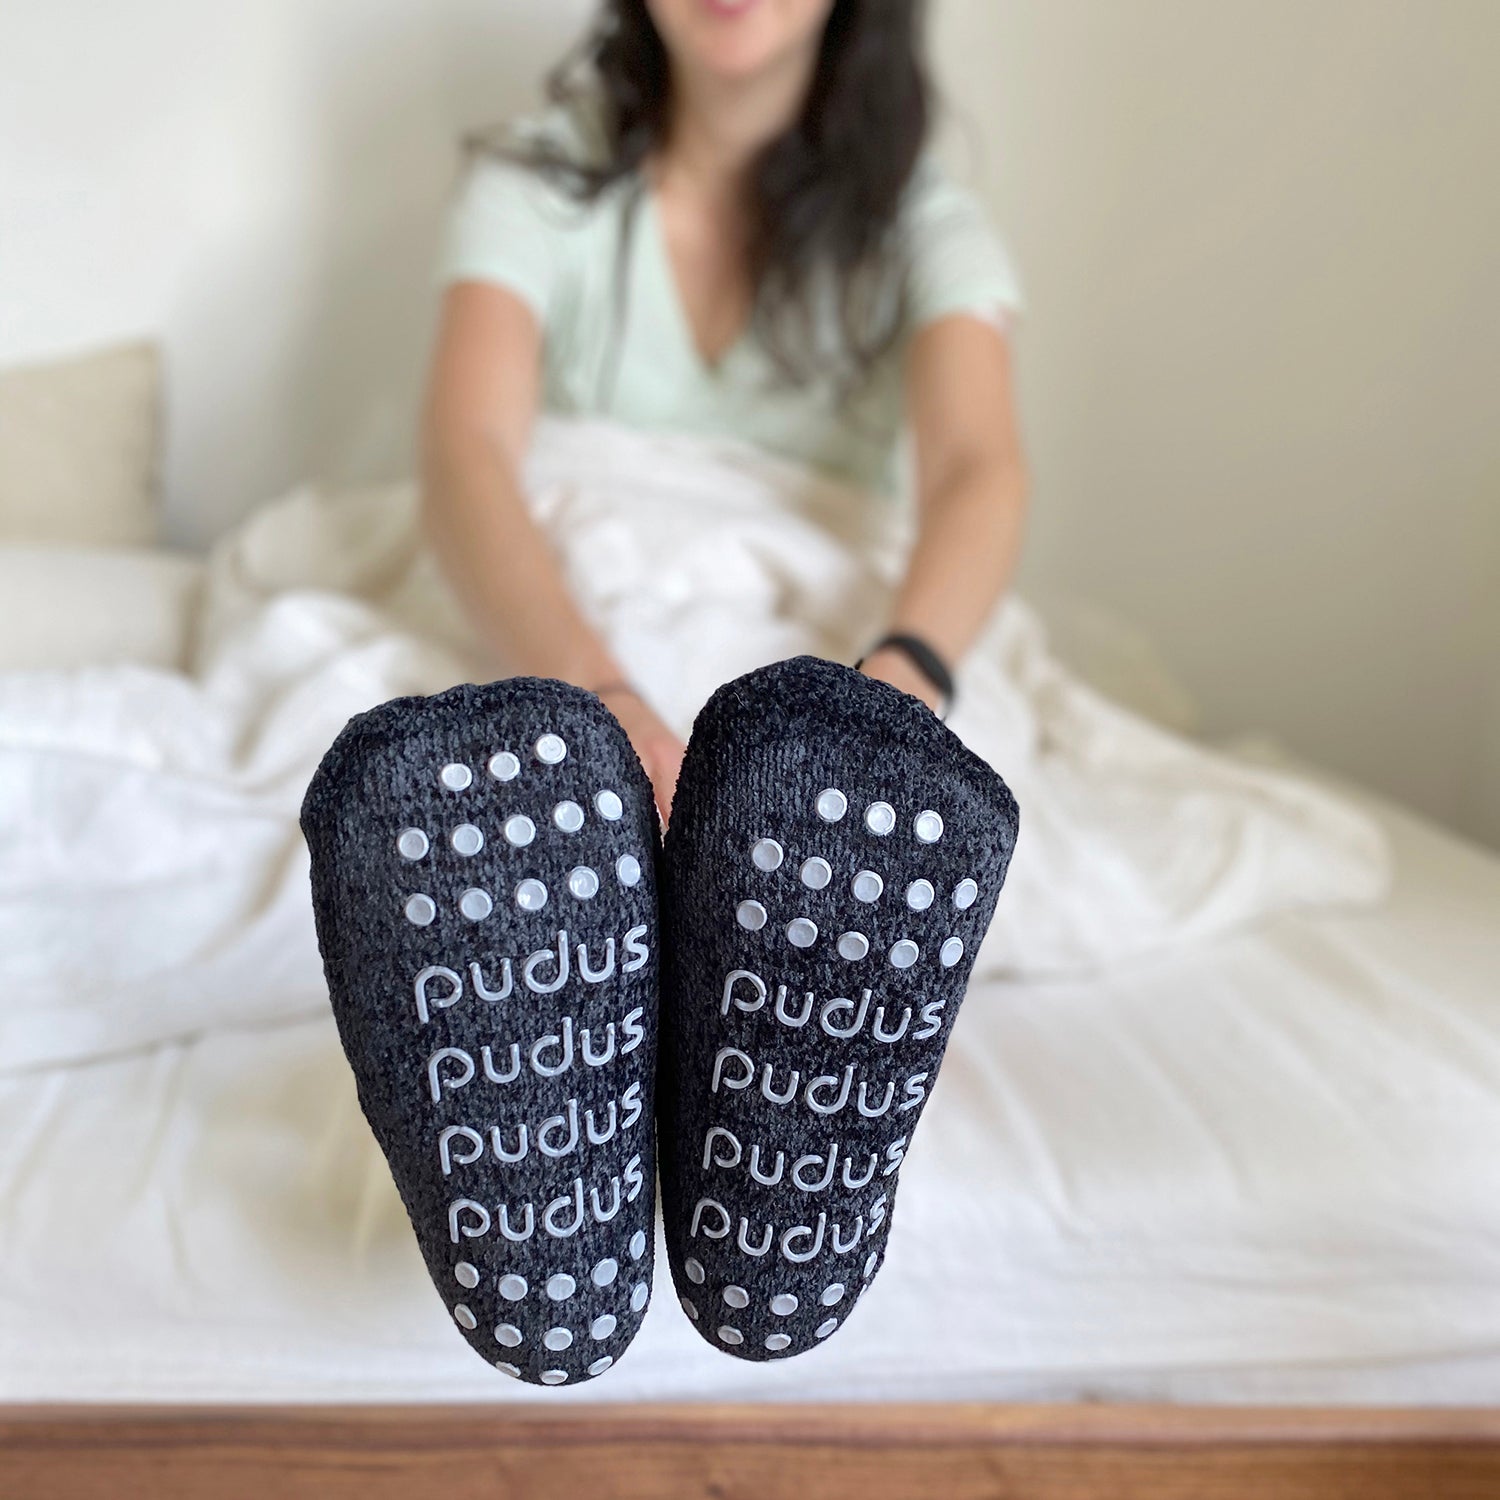 Pudus Winter Cable Knit Slipper Socks in Black with Non-Slip Grippers and Faux Fur Sherpa Fleece Lining